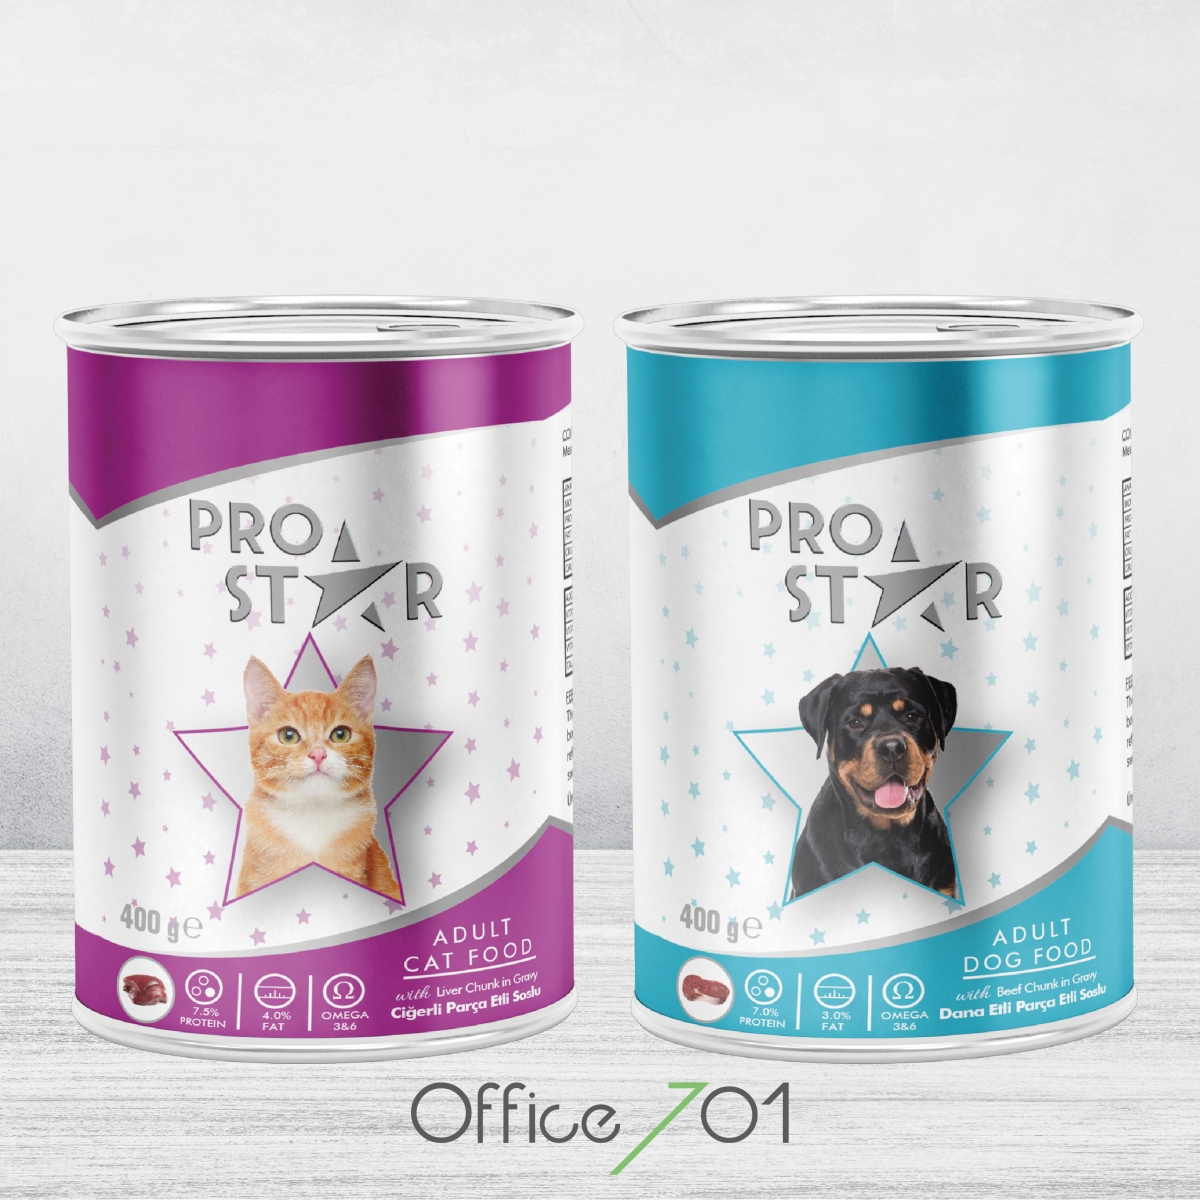 Office701 | Prostar Canned Pet Food Packaging Design